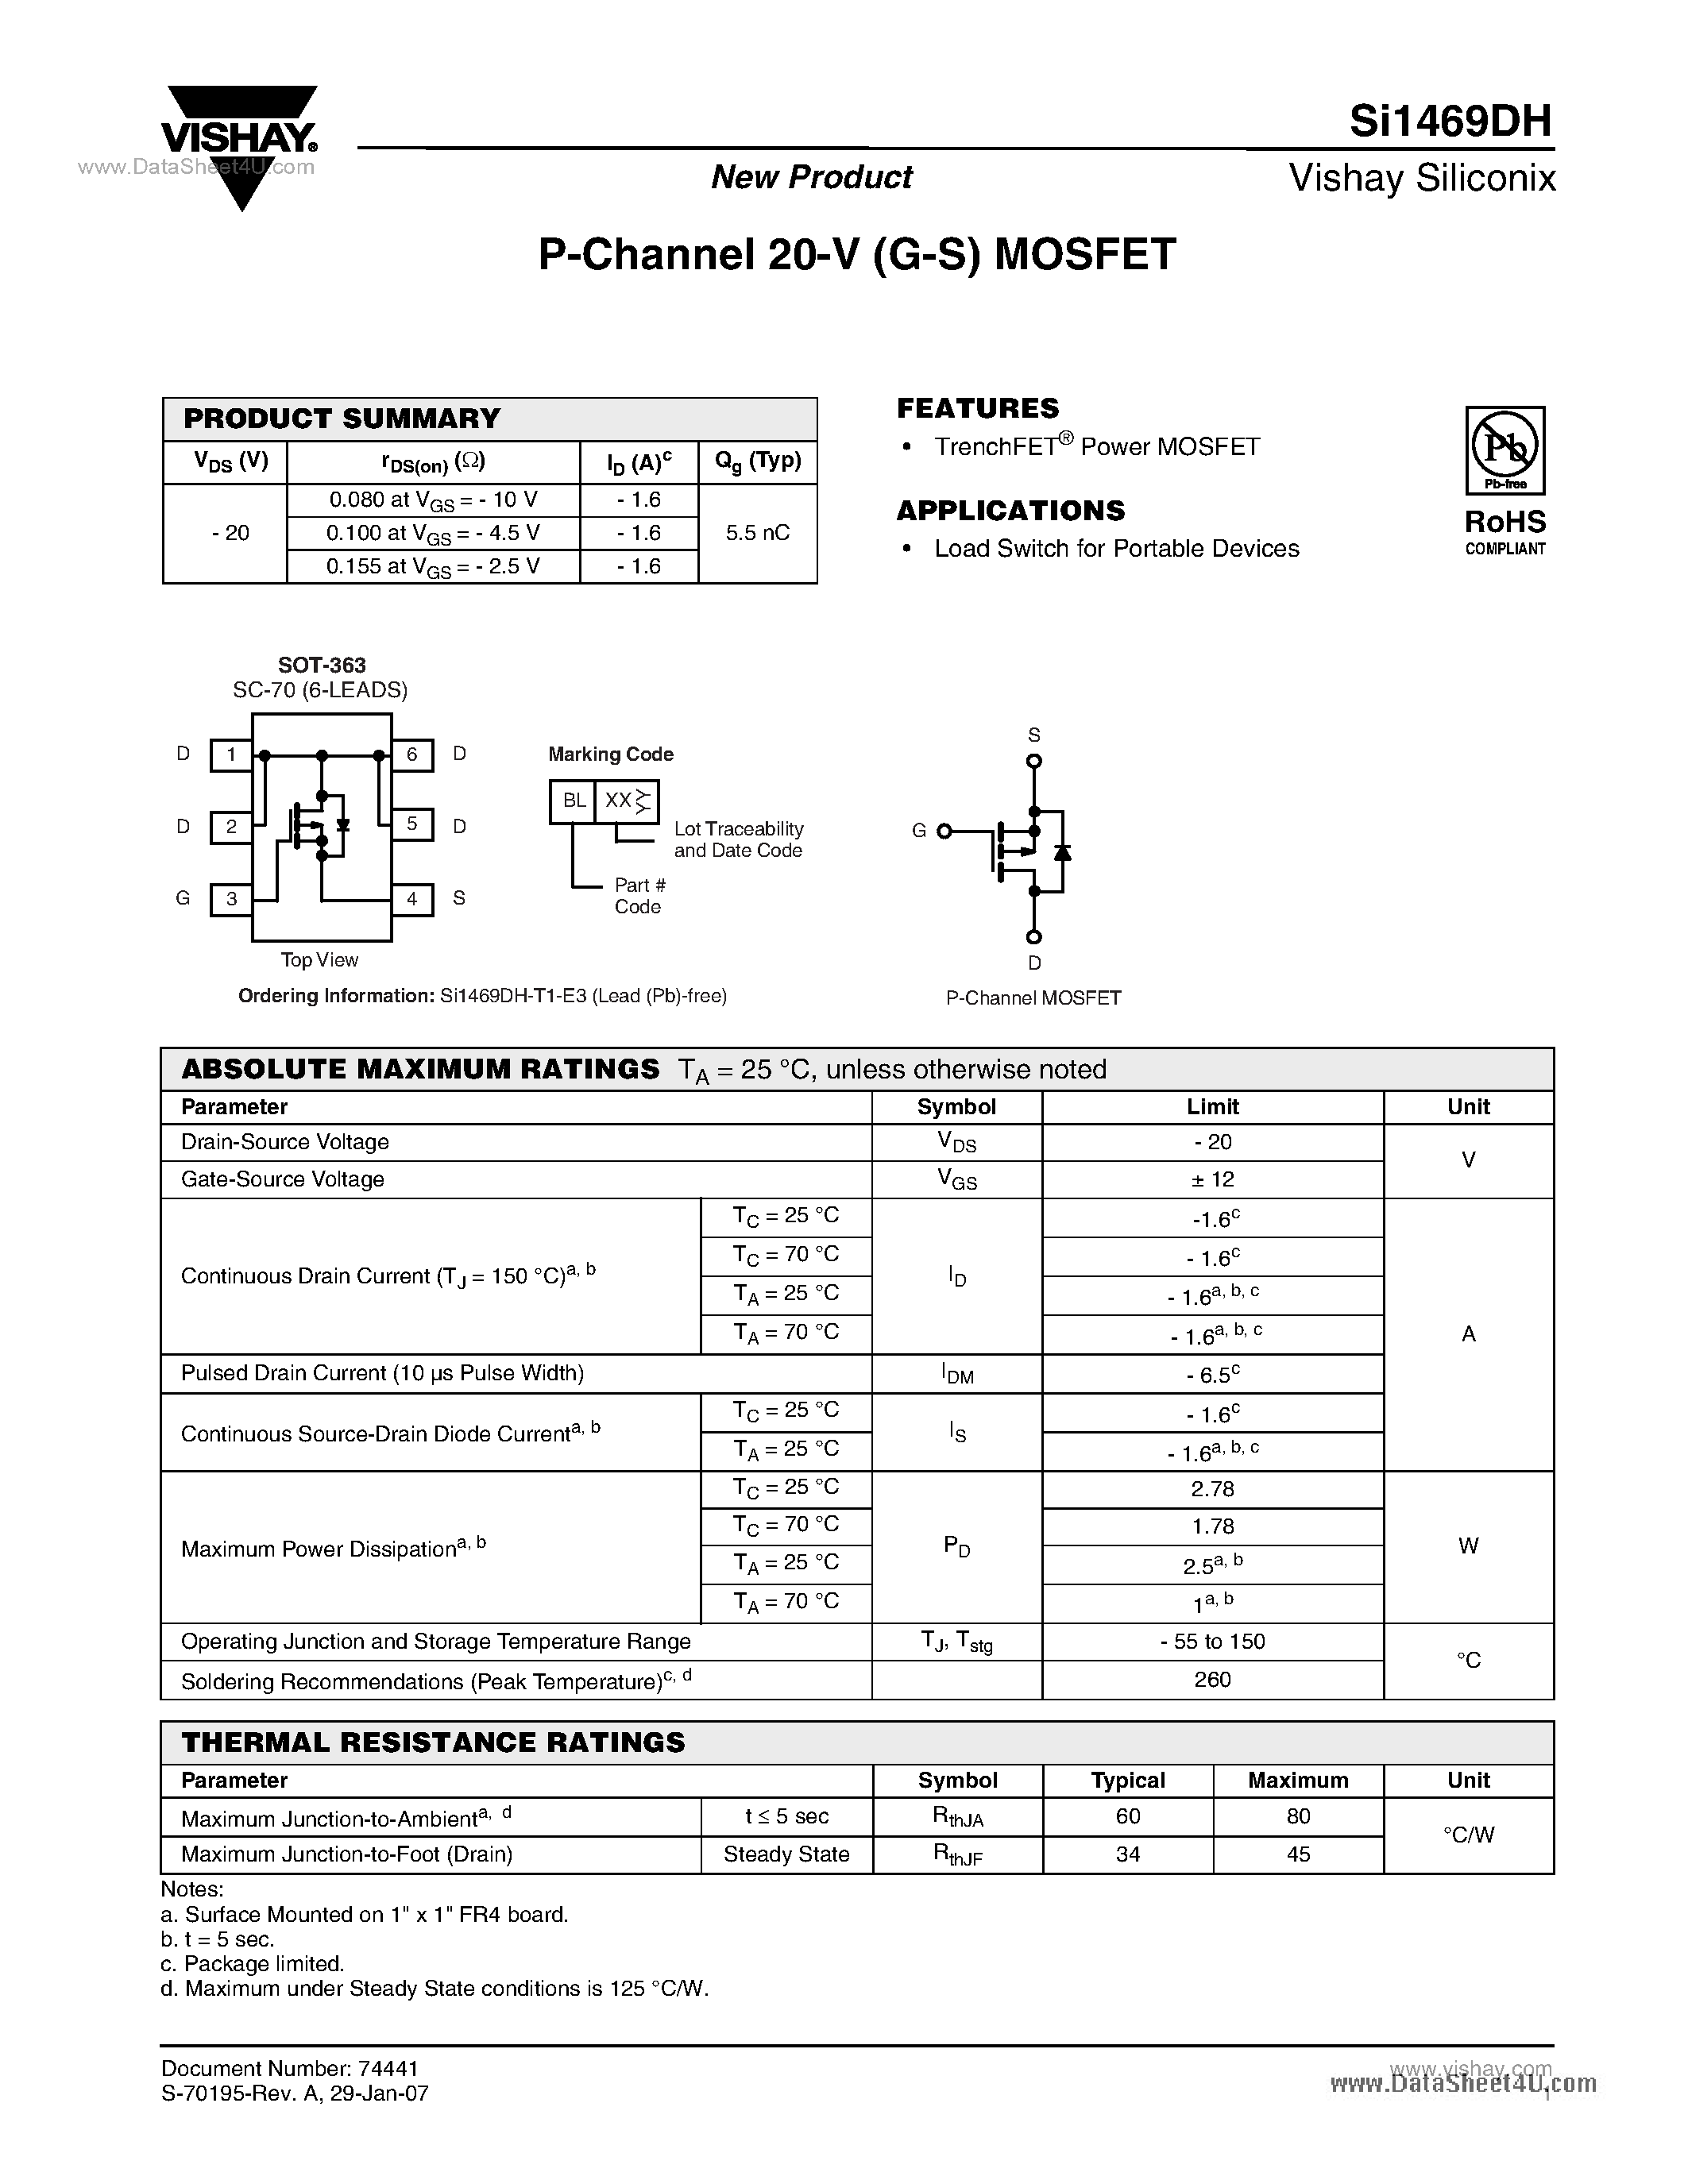 Datasheet SI1469DH - P-Channel 20-V (G-S) MOSFET page 1